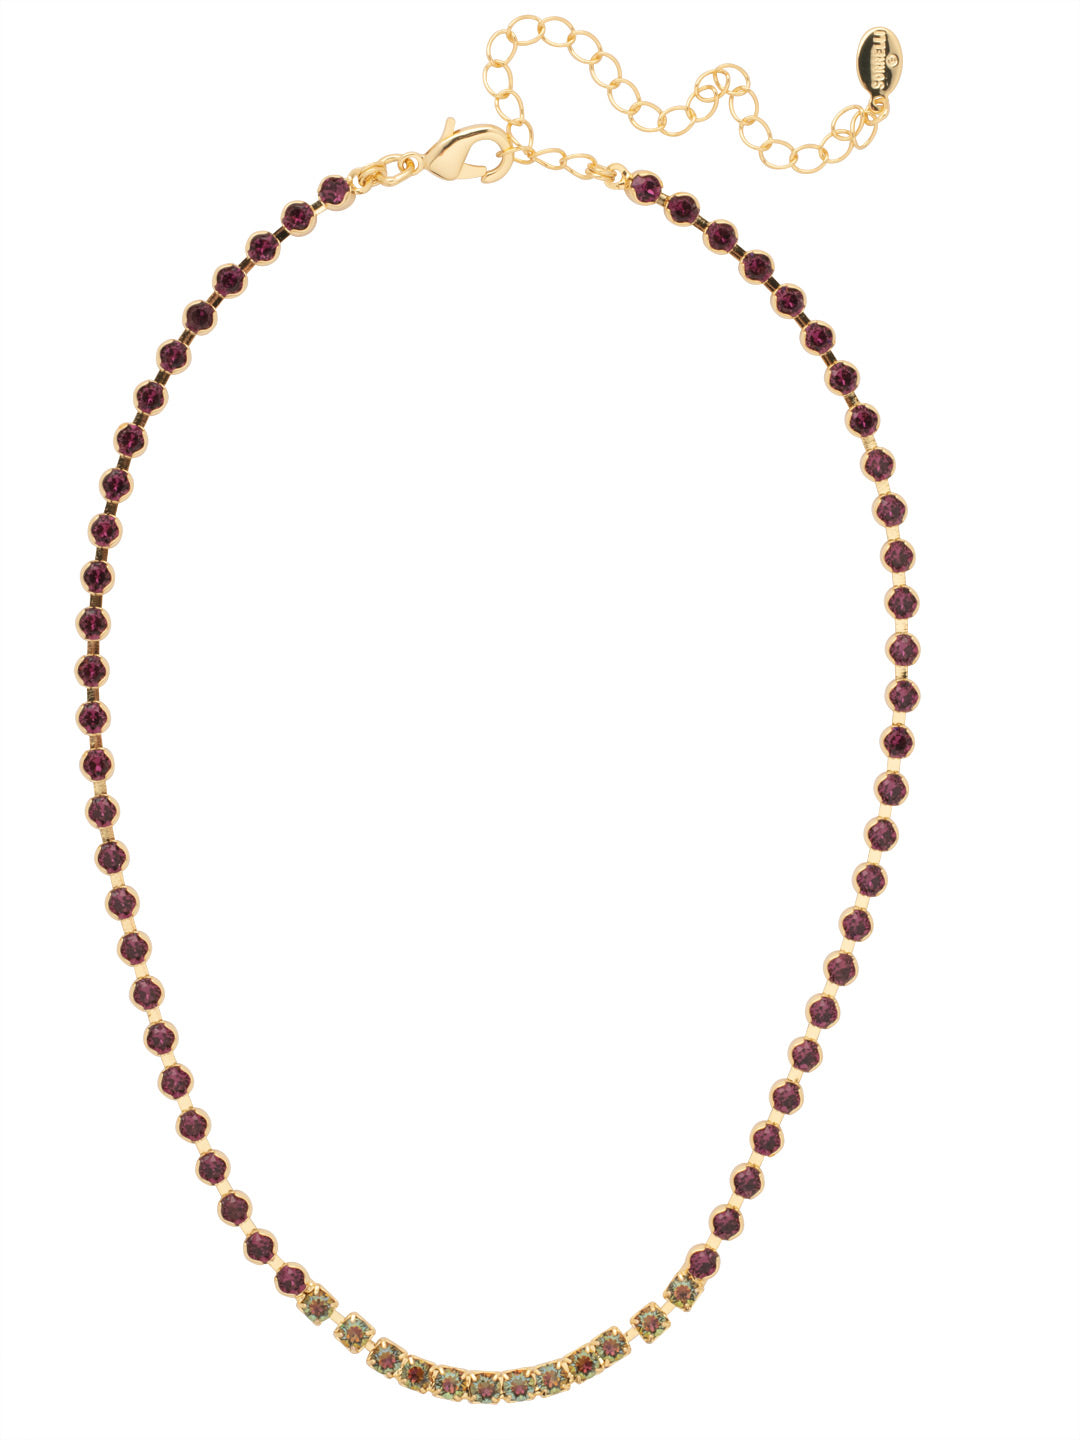 Marnie Tennis Necklace - NFA2BGVO - <p>Perfect for dressing up or down, the classic Marnie Tennis Necklace features a repeating line of crystals secured by a lobster claw clasp. From Sorrelli's Volcano collection in our Bright Gold-tone finish.</p>